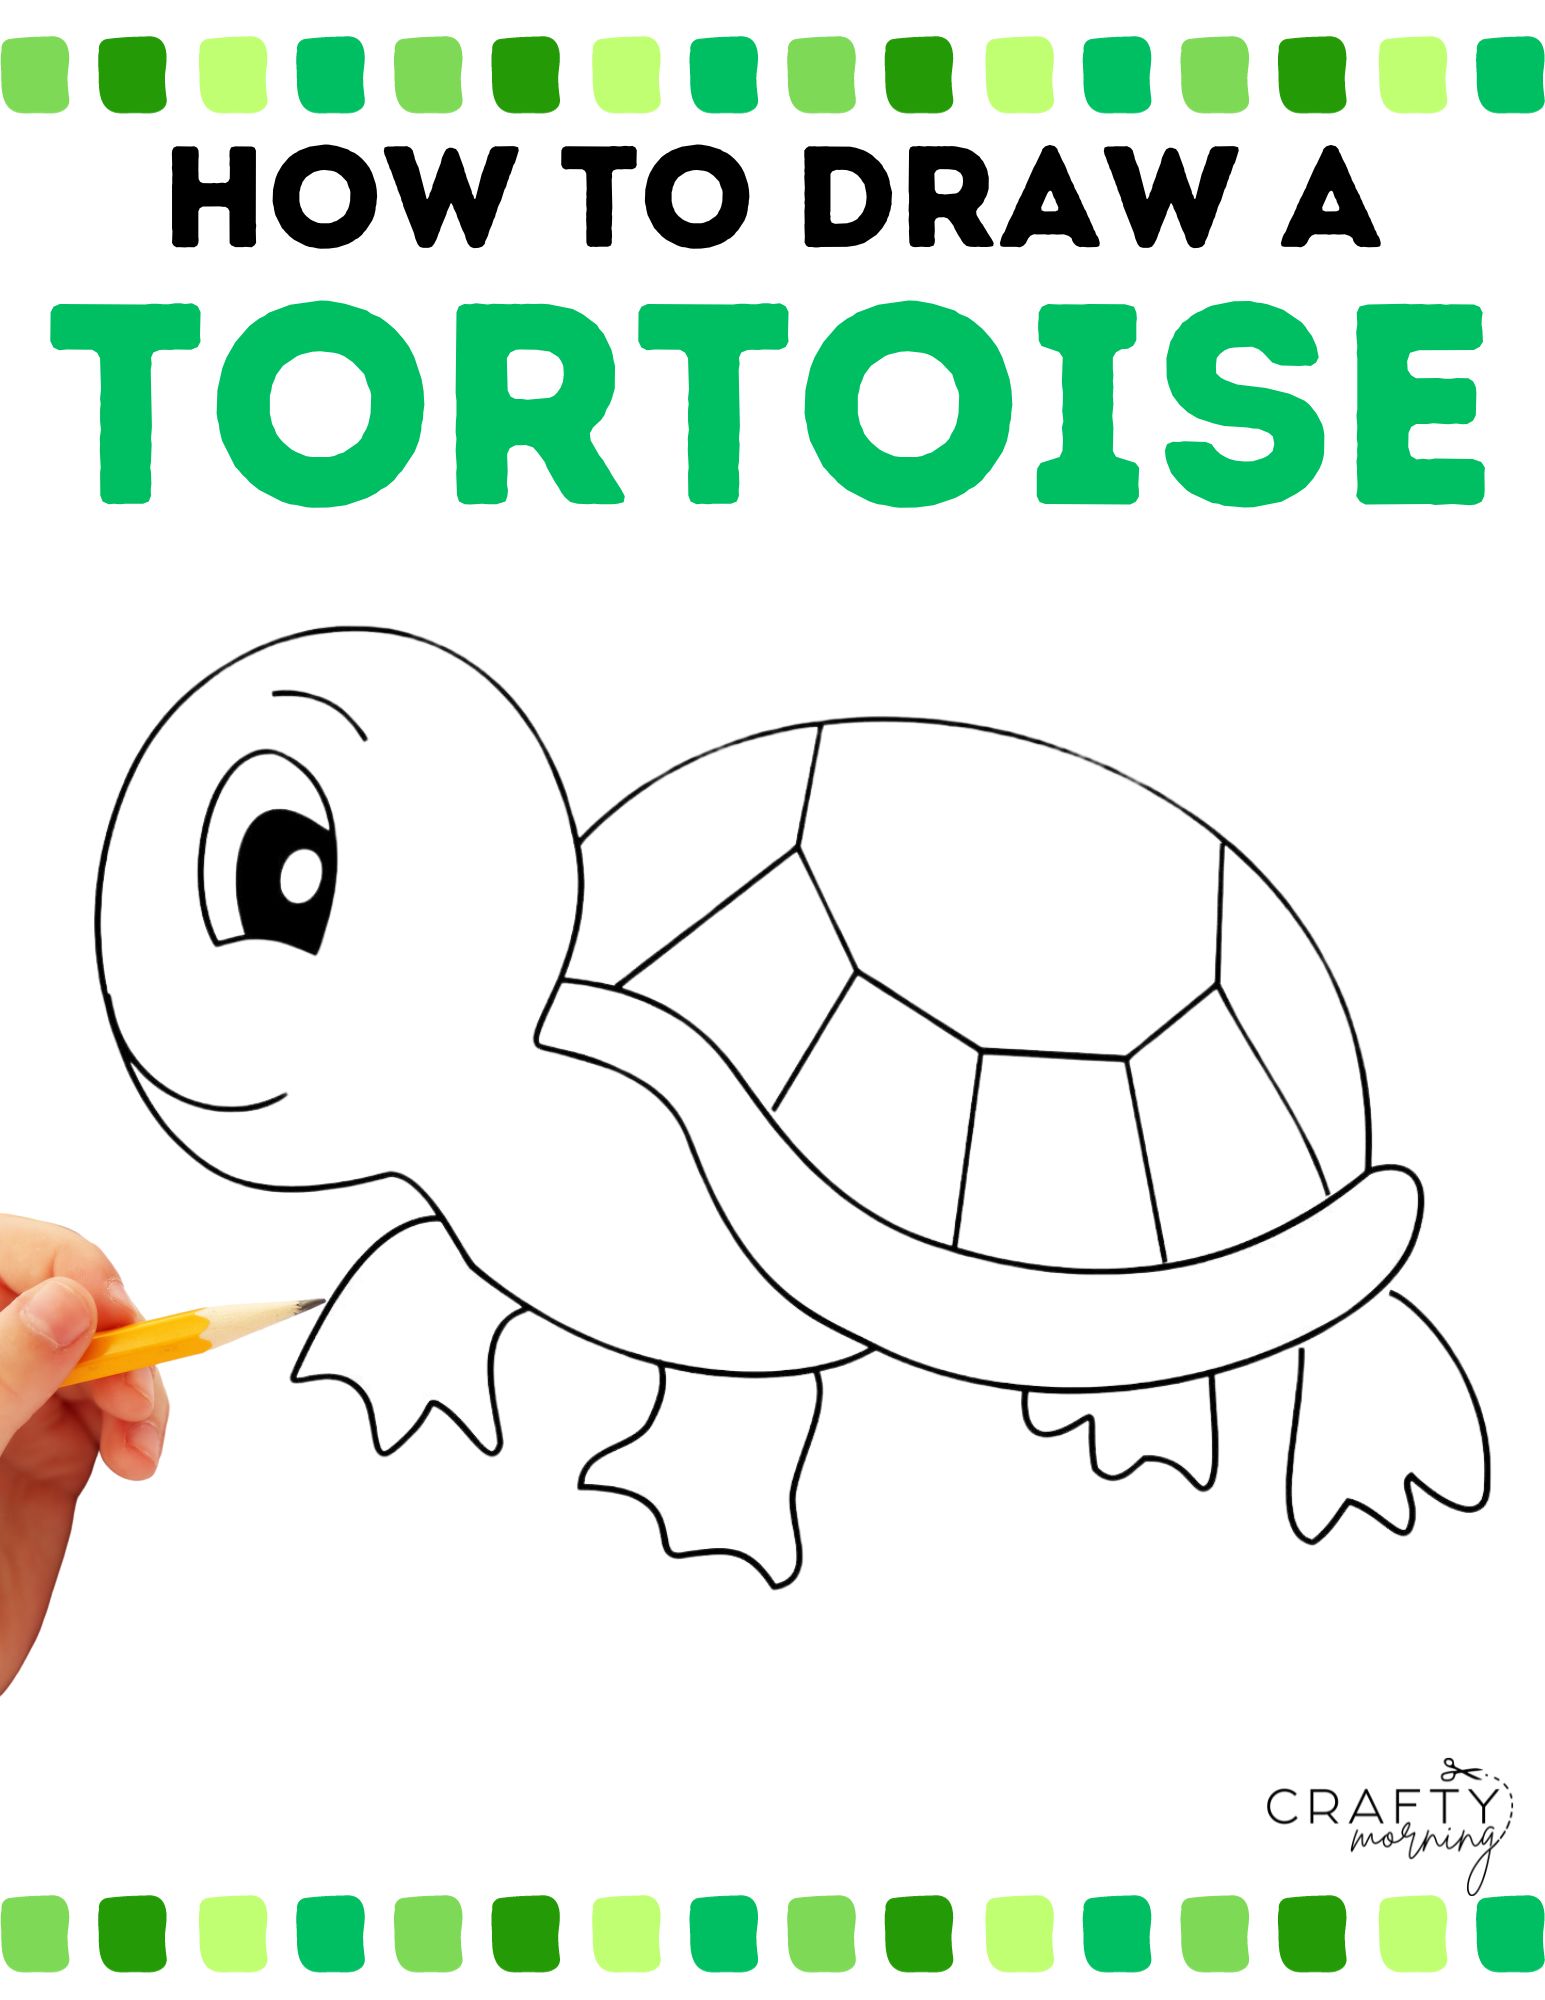 Draw tortoise step by step easily. Tortoise drawing #drawing | Learn tortoise  drawing easily. 𝗟𝗶𝗸𝗲 and 𝘀𝗵𝗮𝗿𝗲 our page and video to support  us.Watch full video in slow speed. Click https://youtu.be/8q3Qooa_kJk |